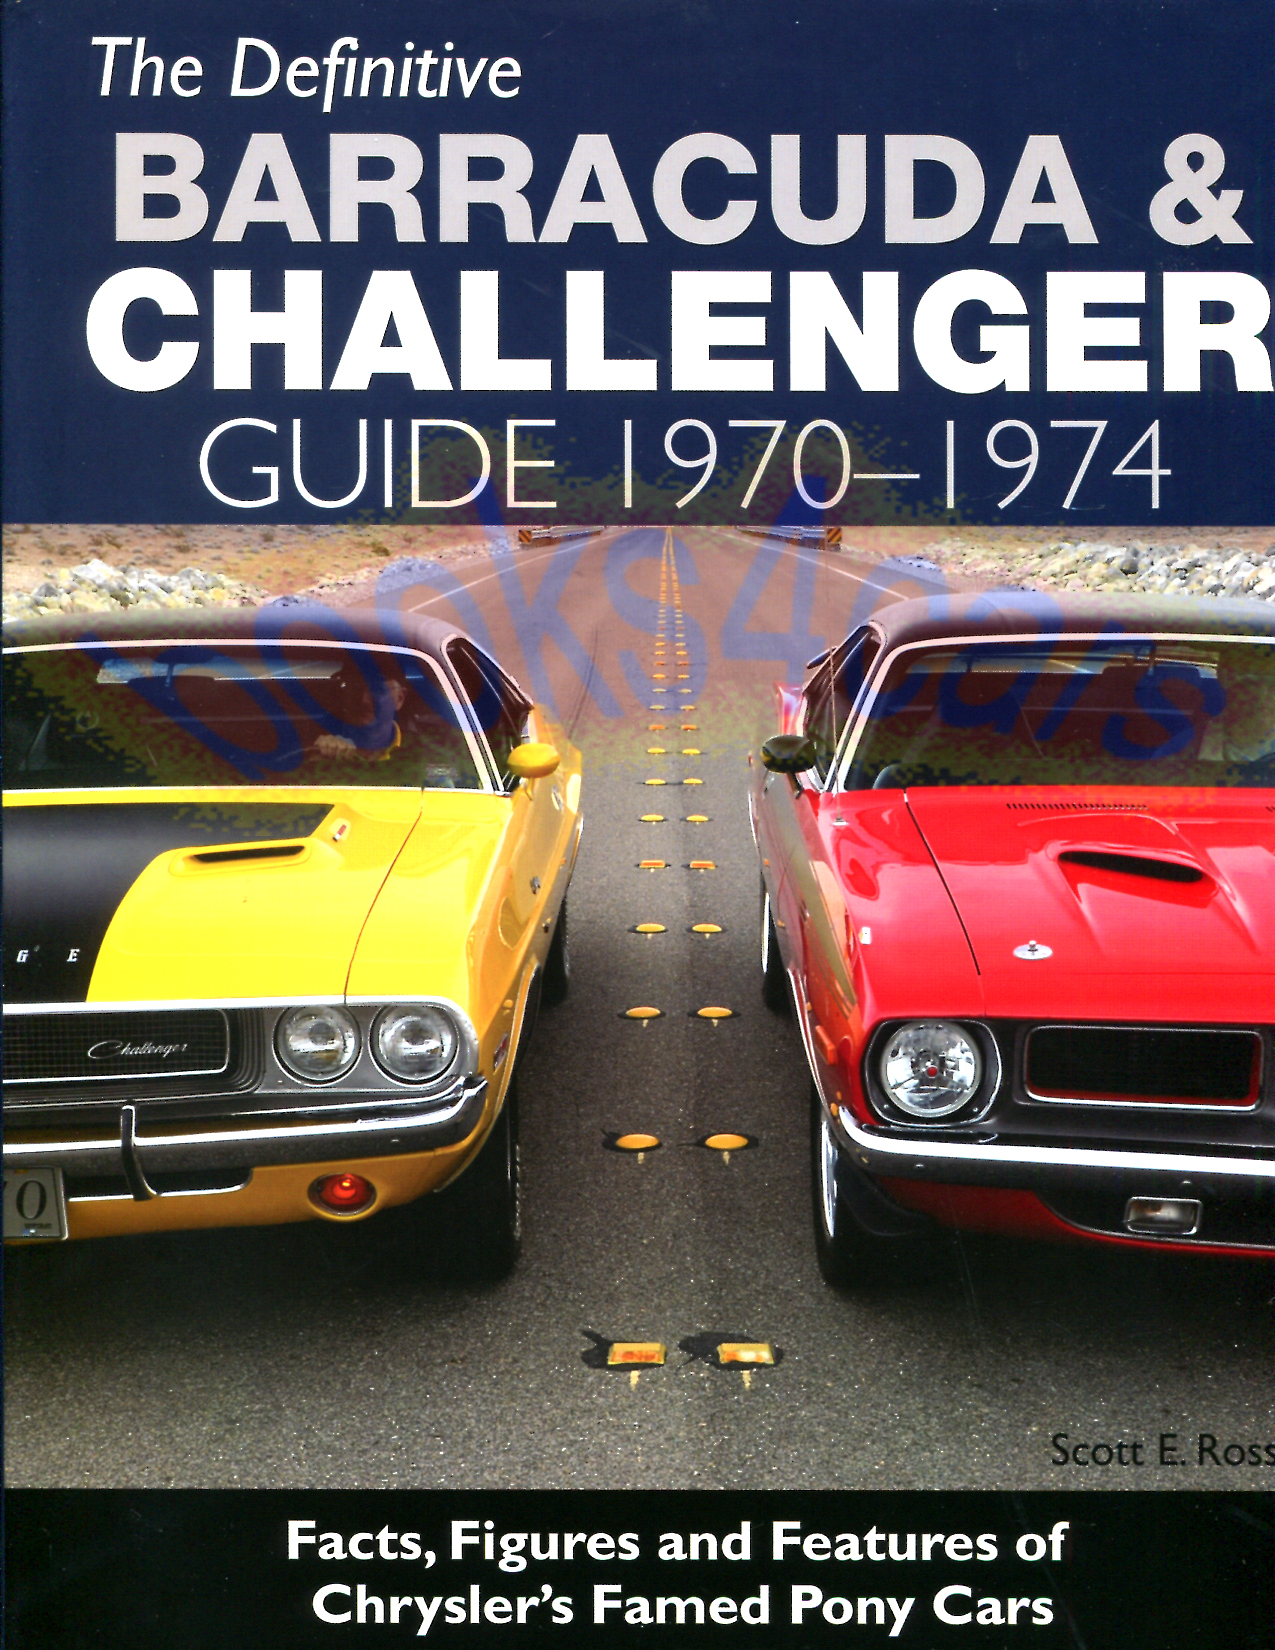 70-74 Plymouth Barracuda Cuda' & Dodge Challenger definitive guide by S. Ross 192 pages hardcover Facts Figures and Features of Chryler's Famed Pony Cars